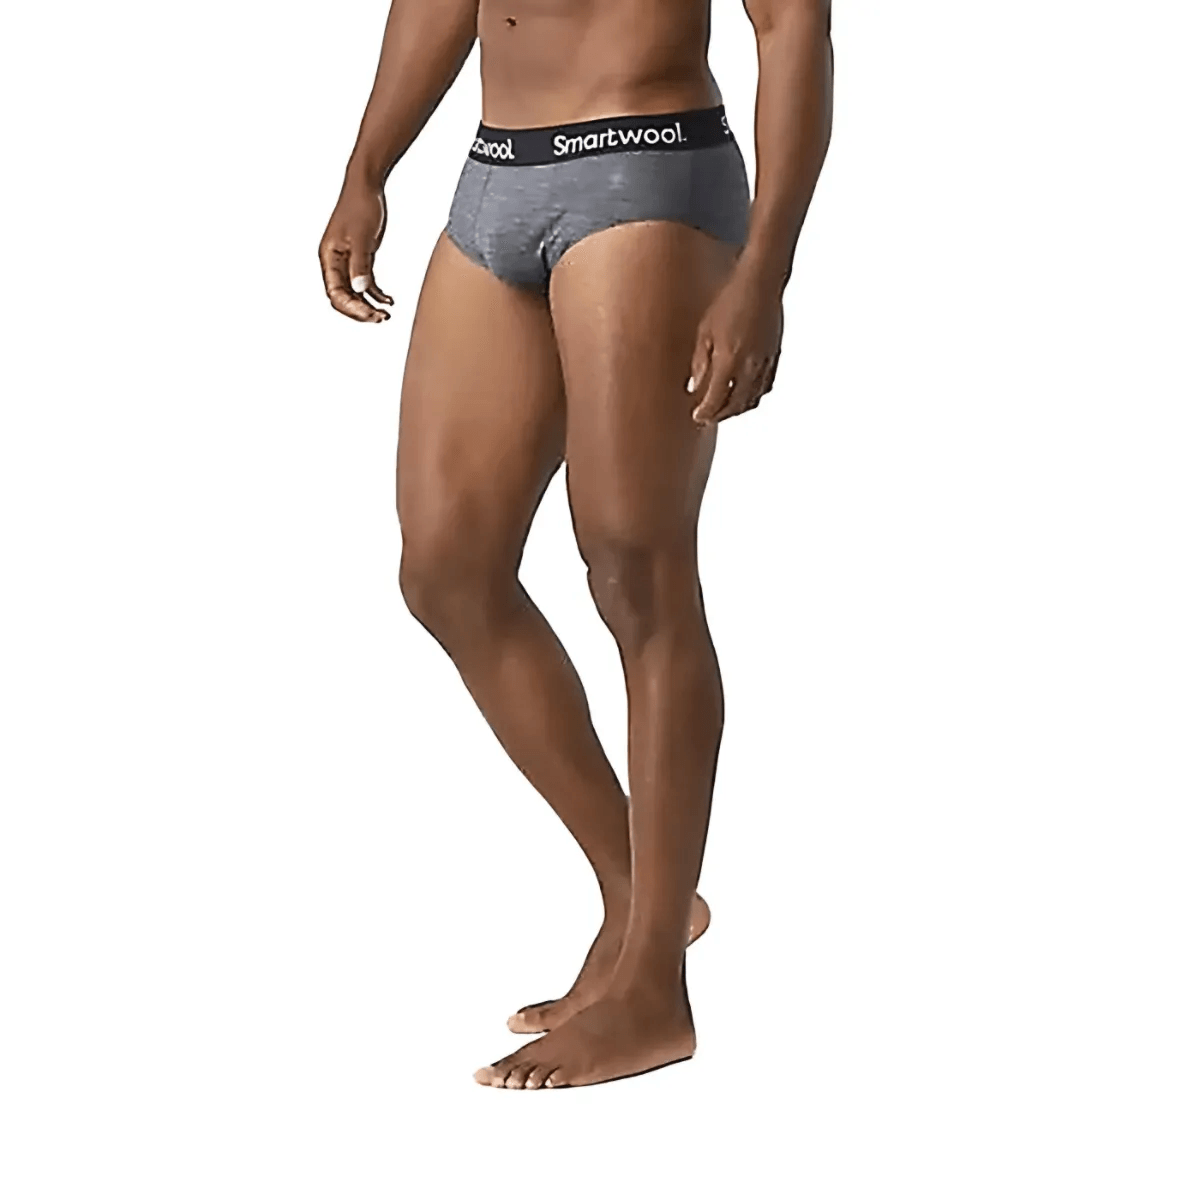 Smartwool Merino Sport 150 Brief Boxed - Men's - Al's Sporting Goods: Your  One-Stop Shop for Outdoor Sports Gear & Apparel